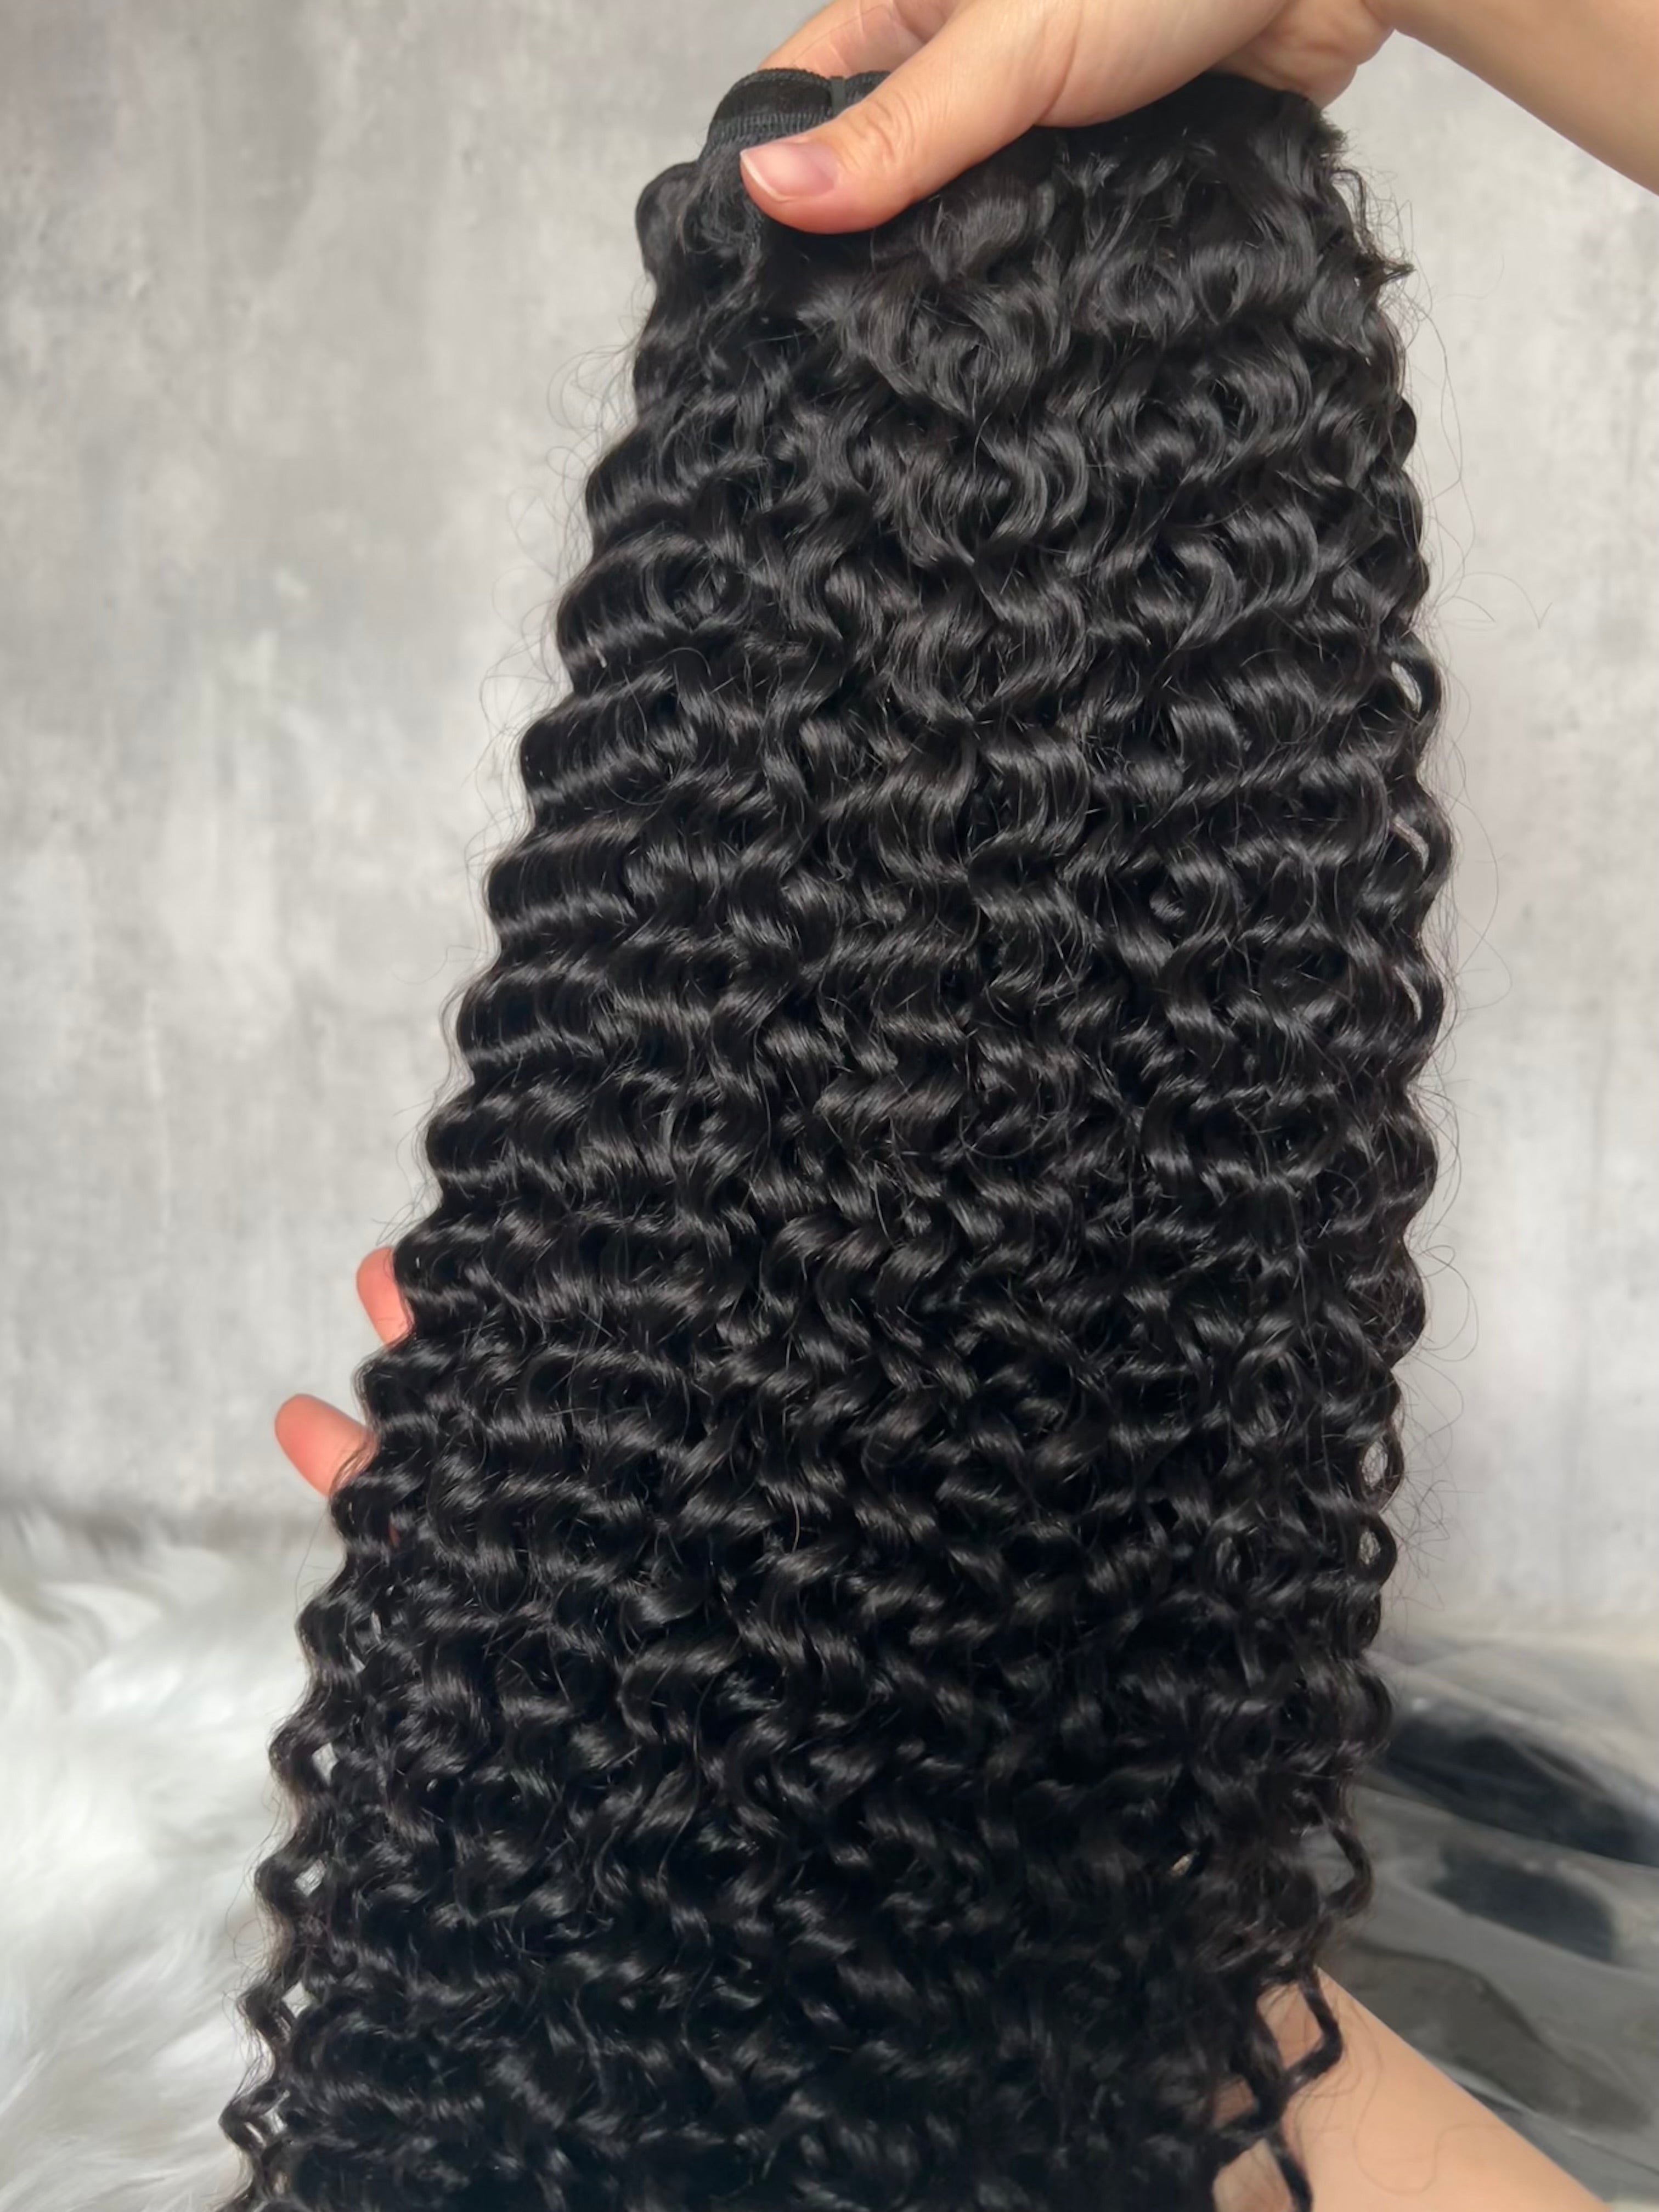 13A Virgin Hair Jerry Curly Extension BMJ Hair